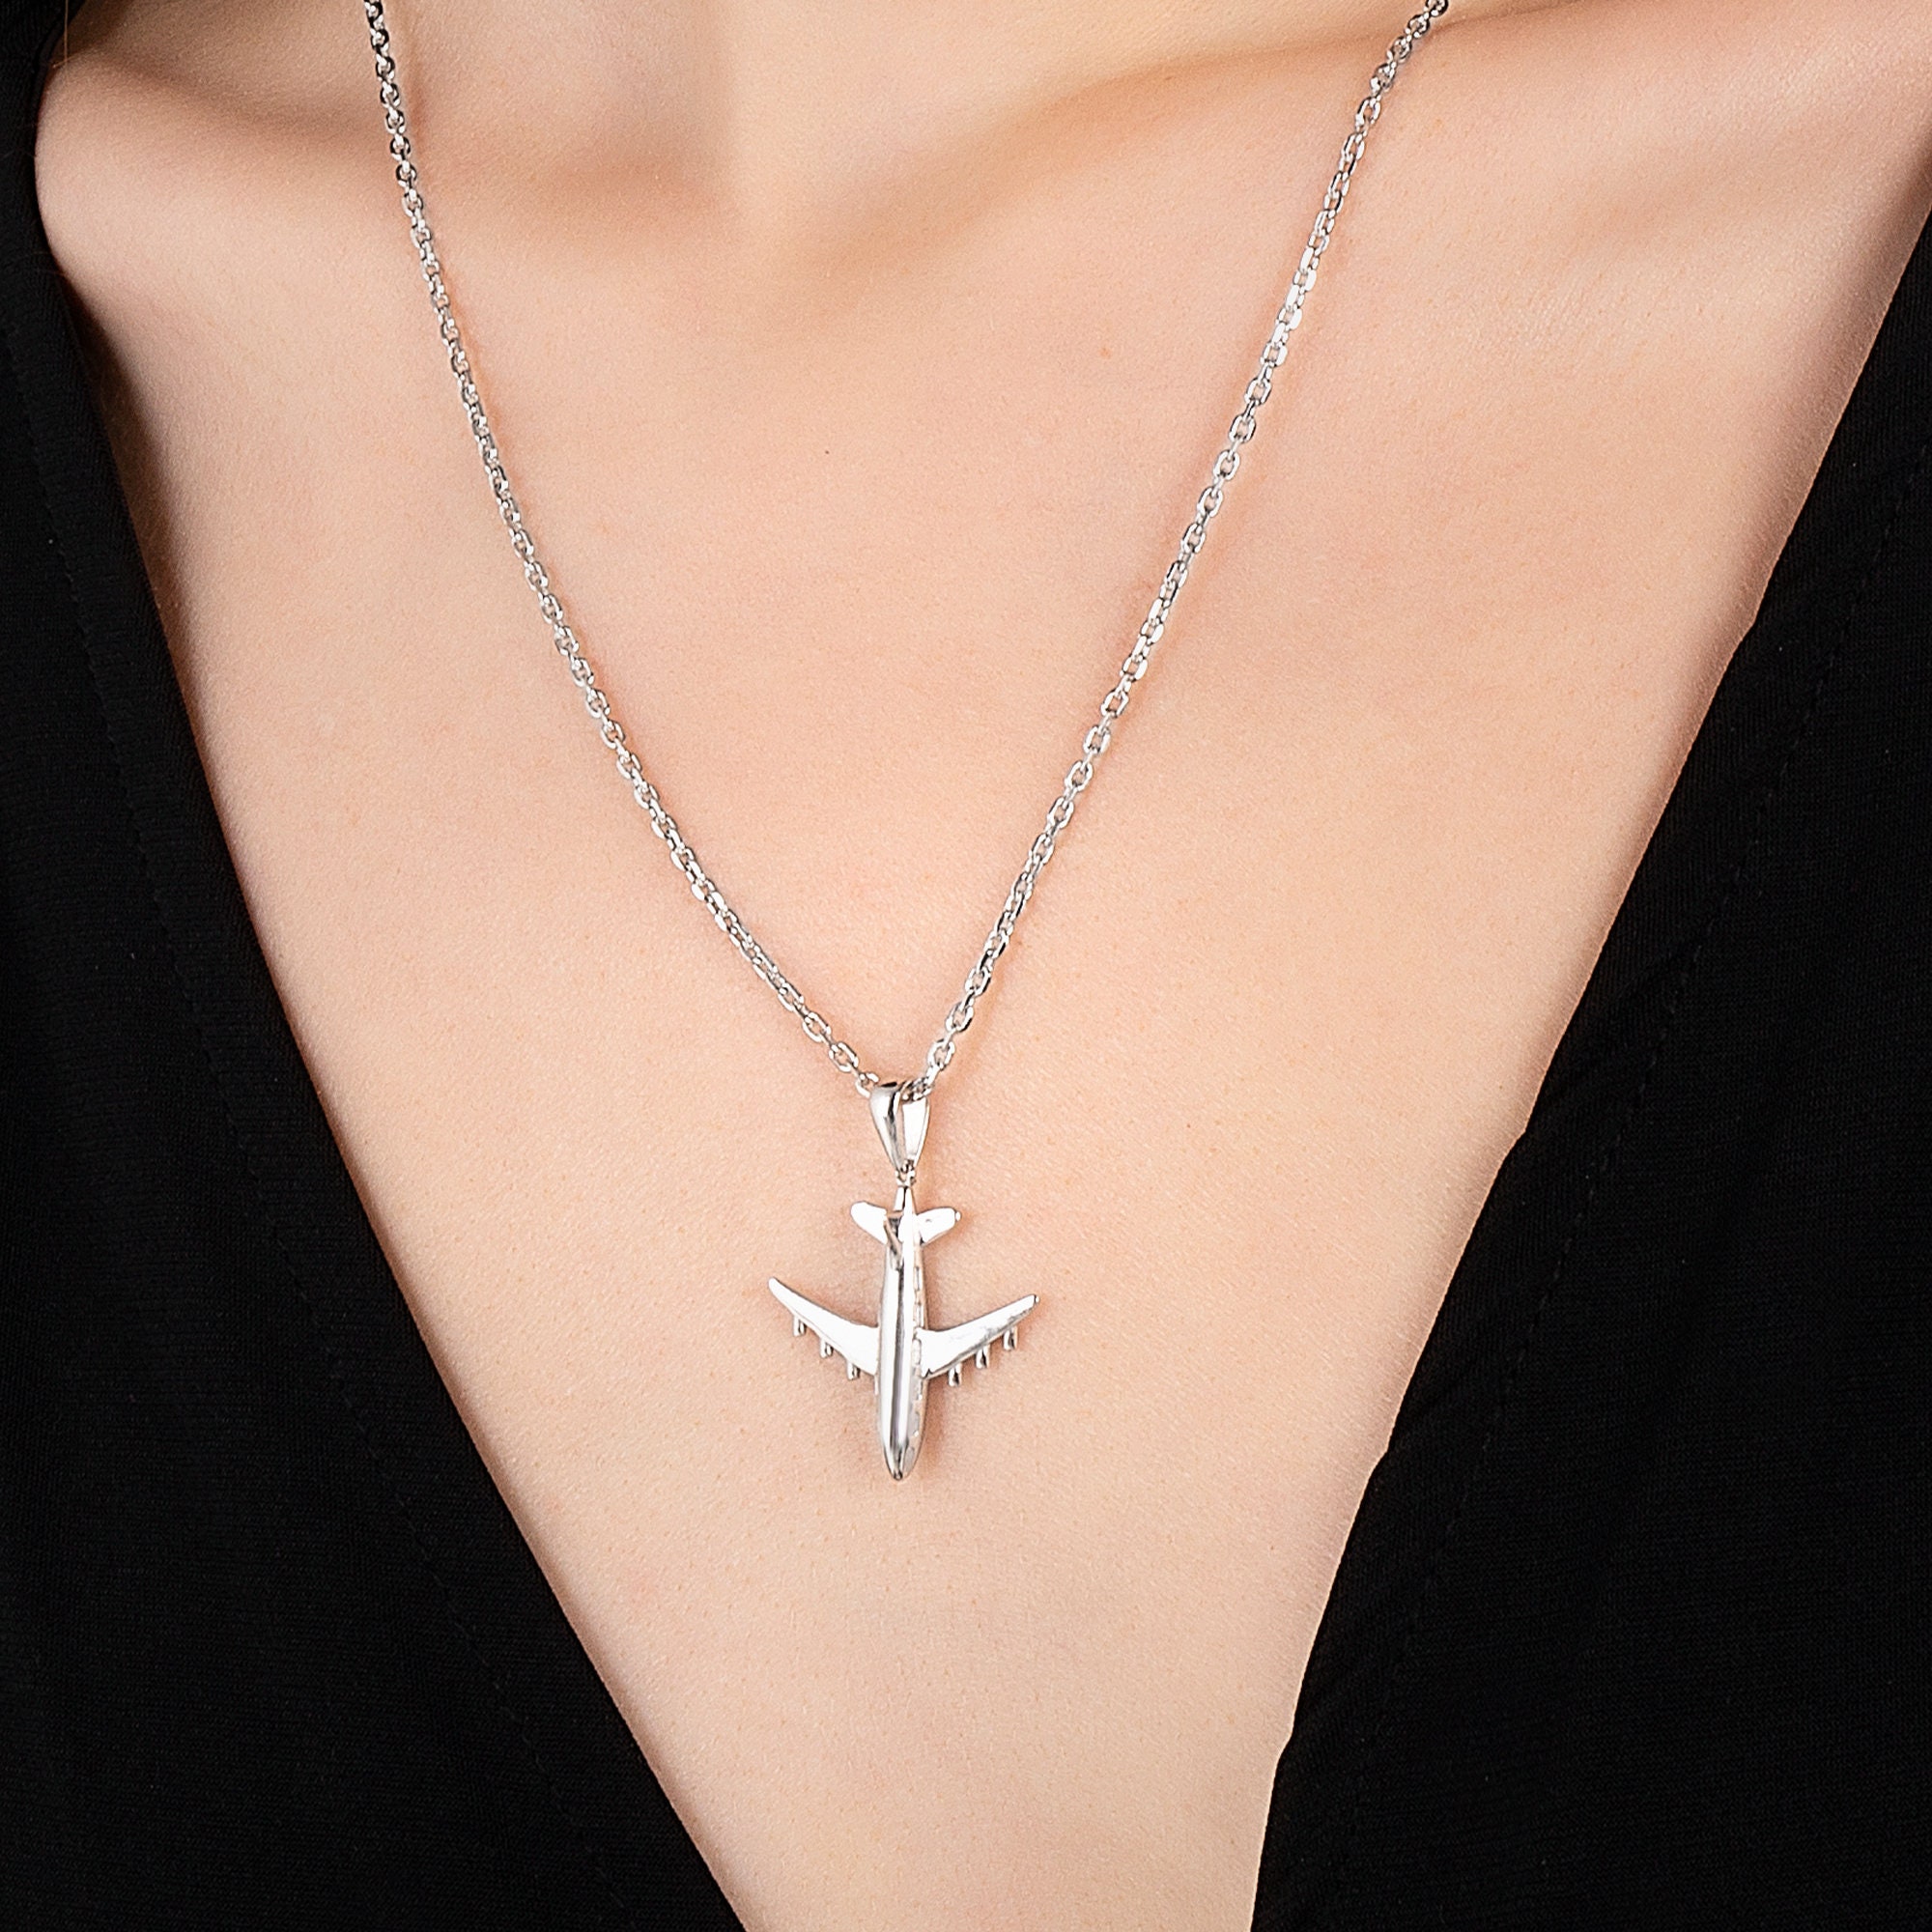 Top 10 plane necklace ideas and inspiration